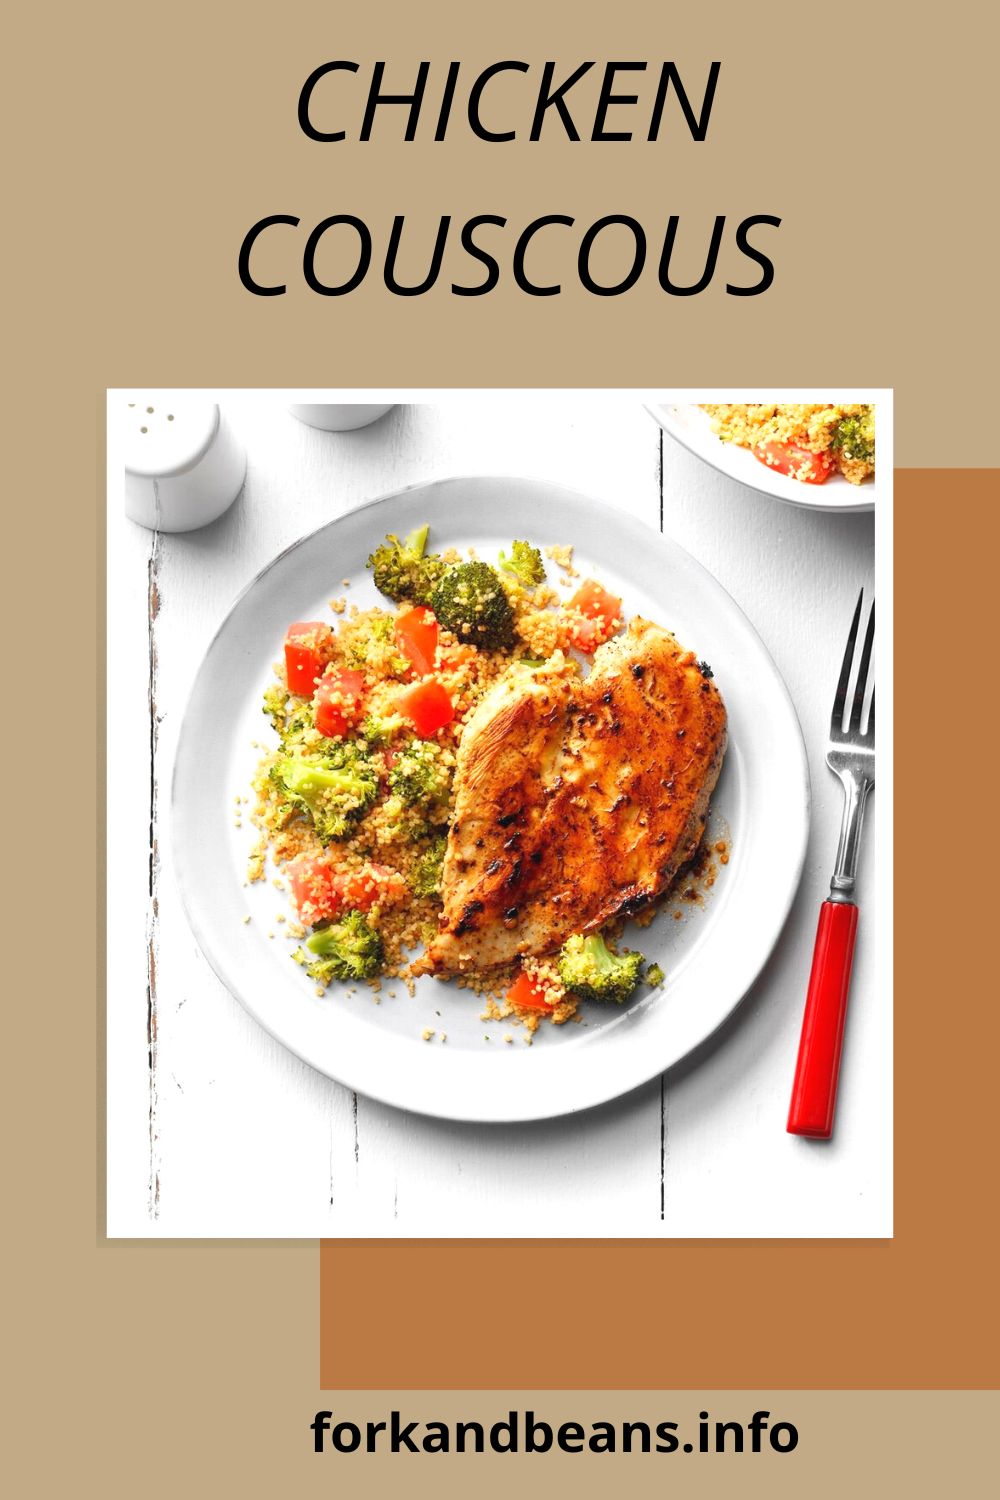 Recipe for chicken with couscous